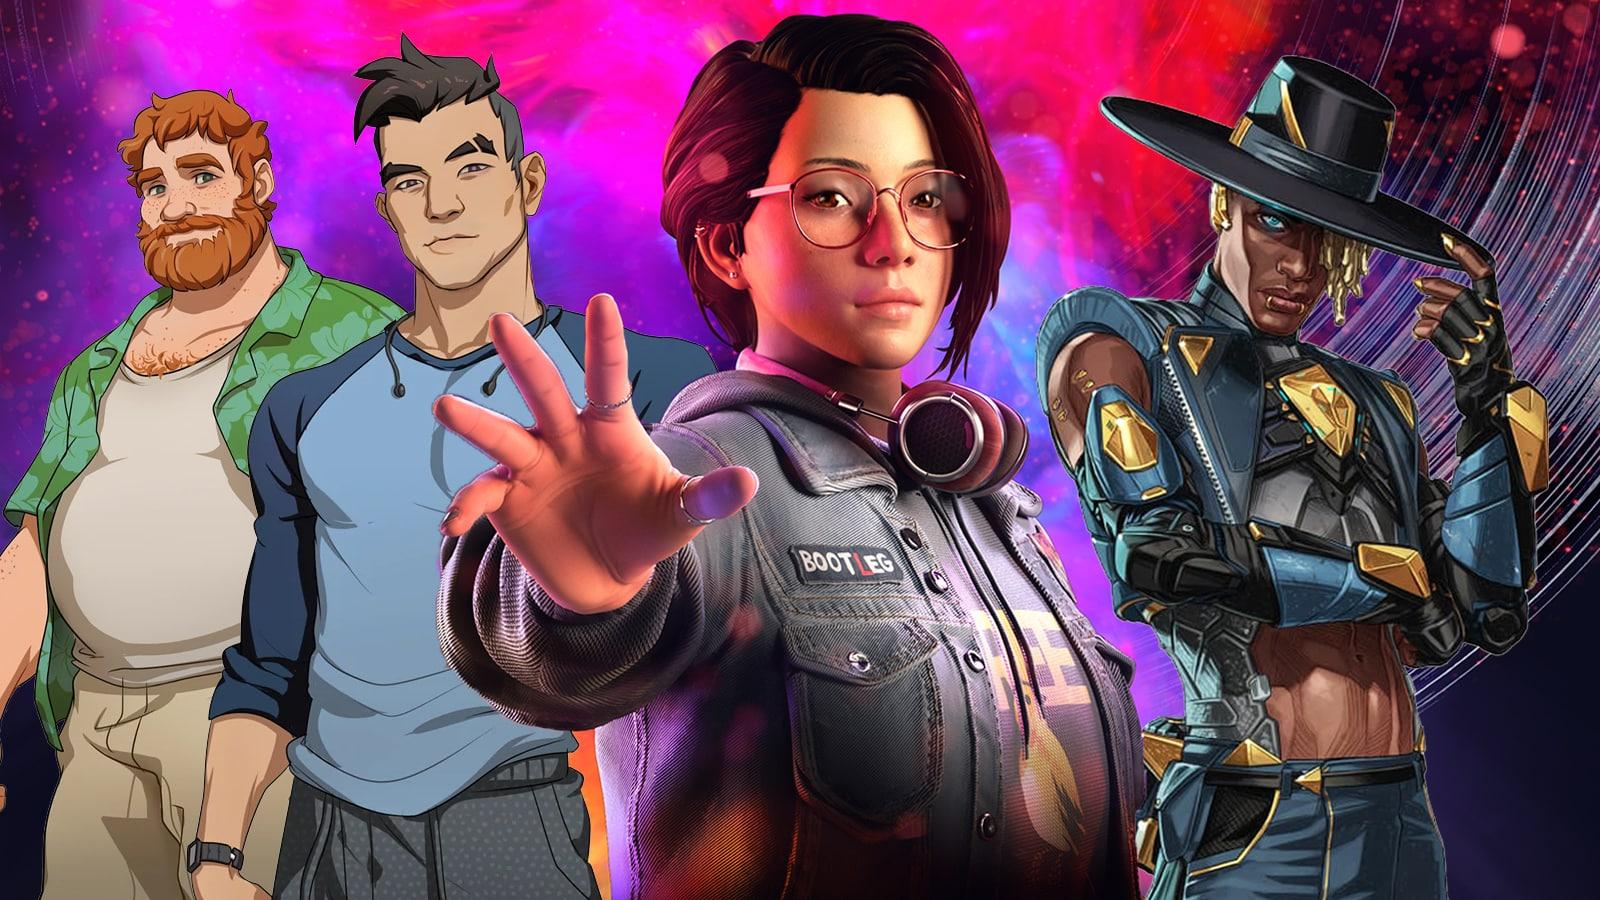 LGBTQ video game characters including Dream Daddy, Life is Strange, and Apex Legends